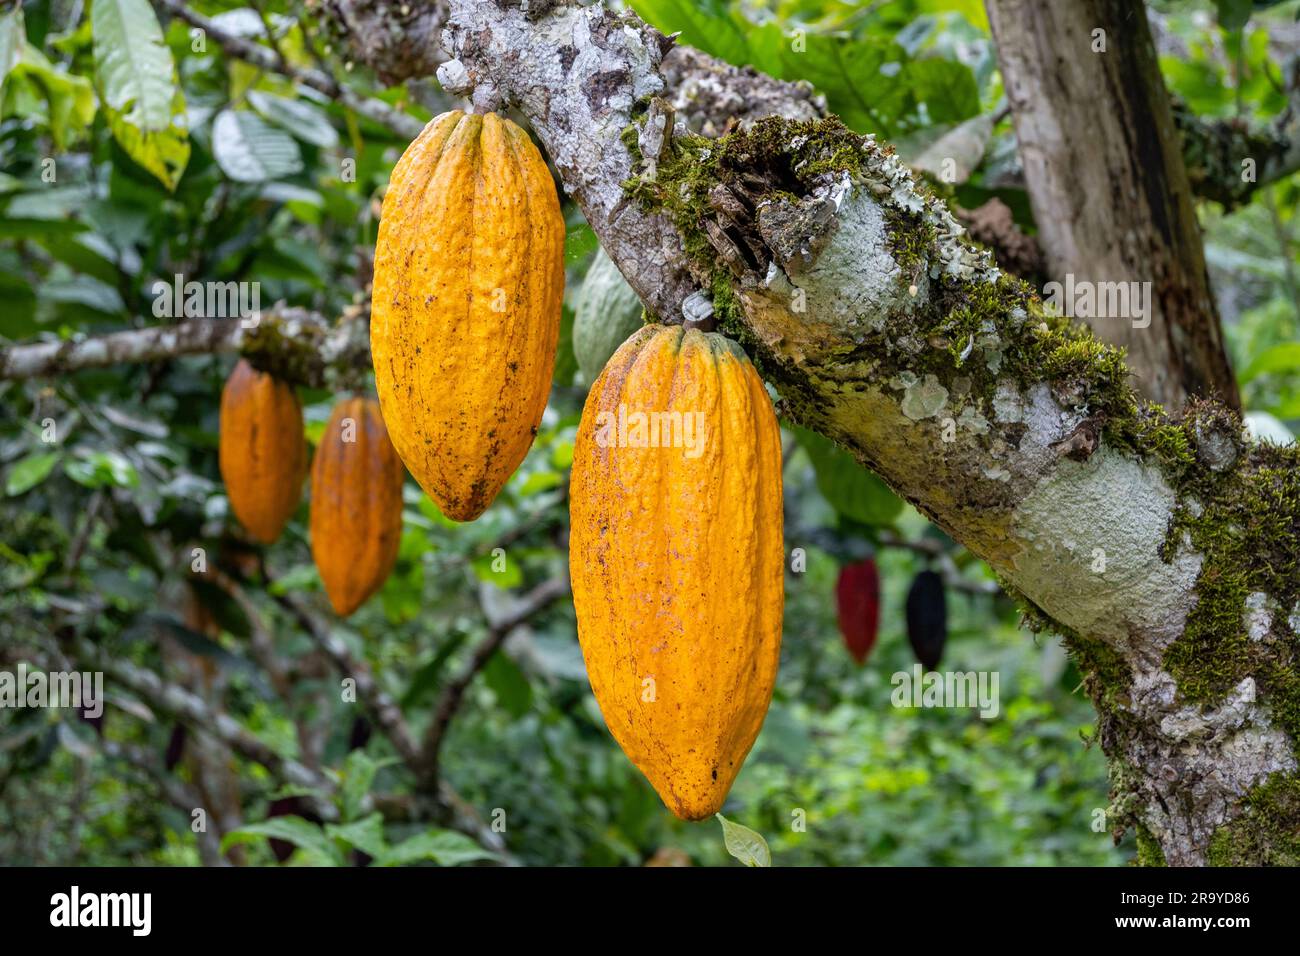 Bright yellow fruits of Theobroma cacao hanging on the tree. Colombia, South America. Stock Photo